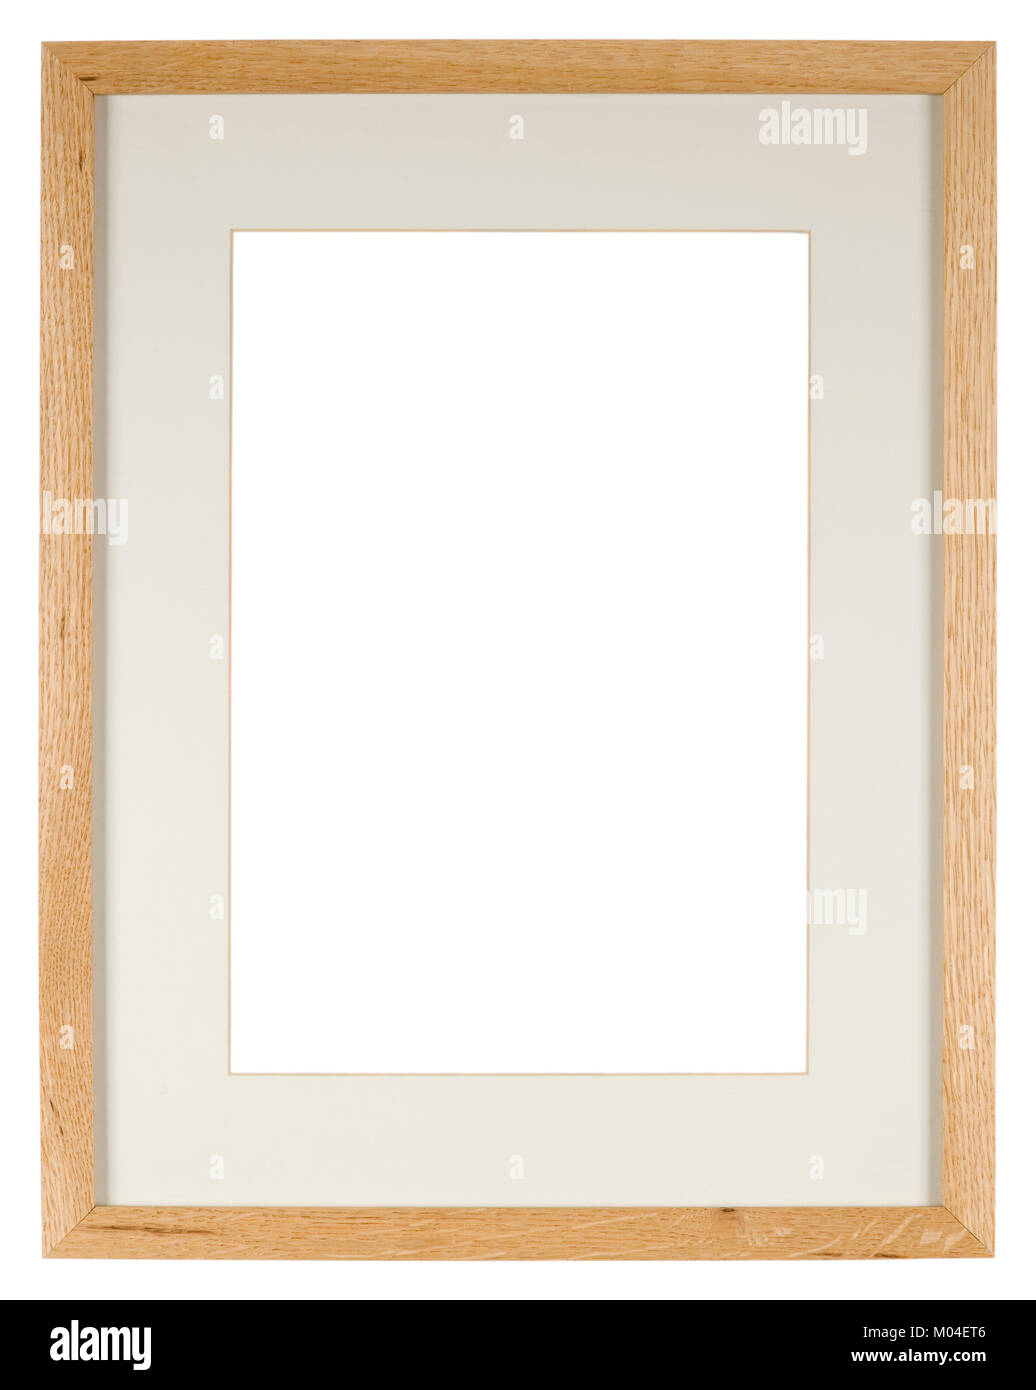 Empty picture frame of light oak wood with a mount Stock Photo